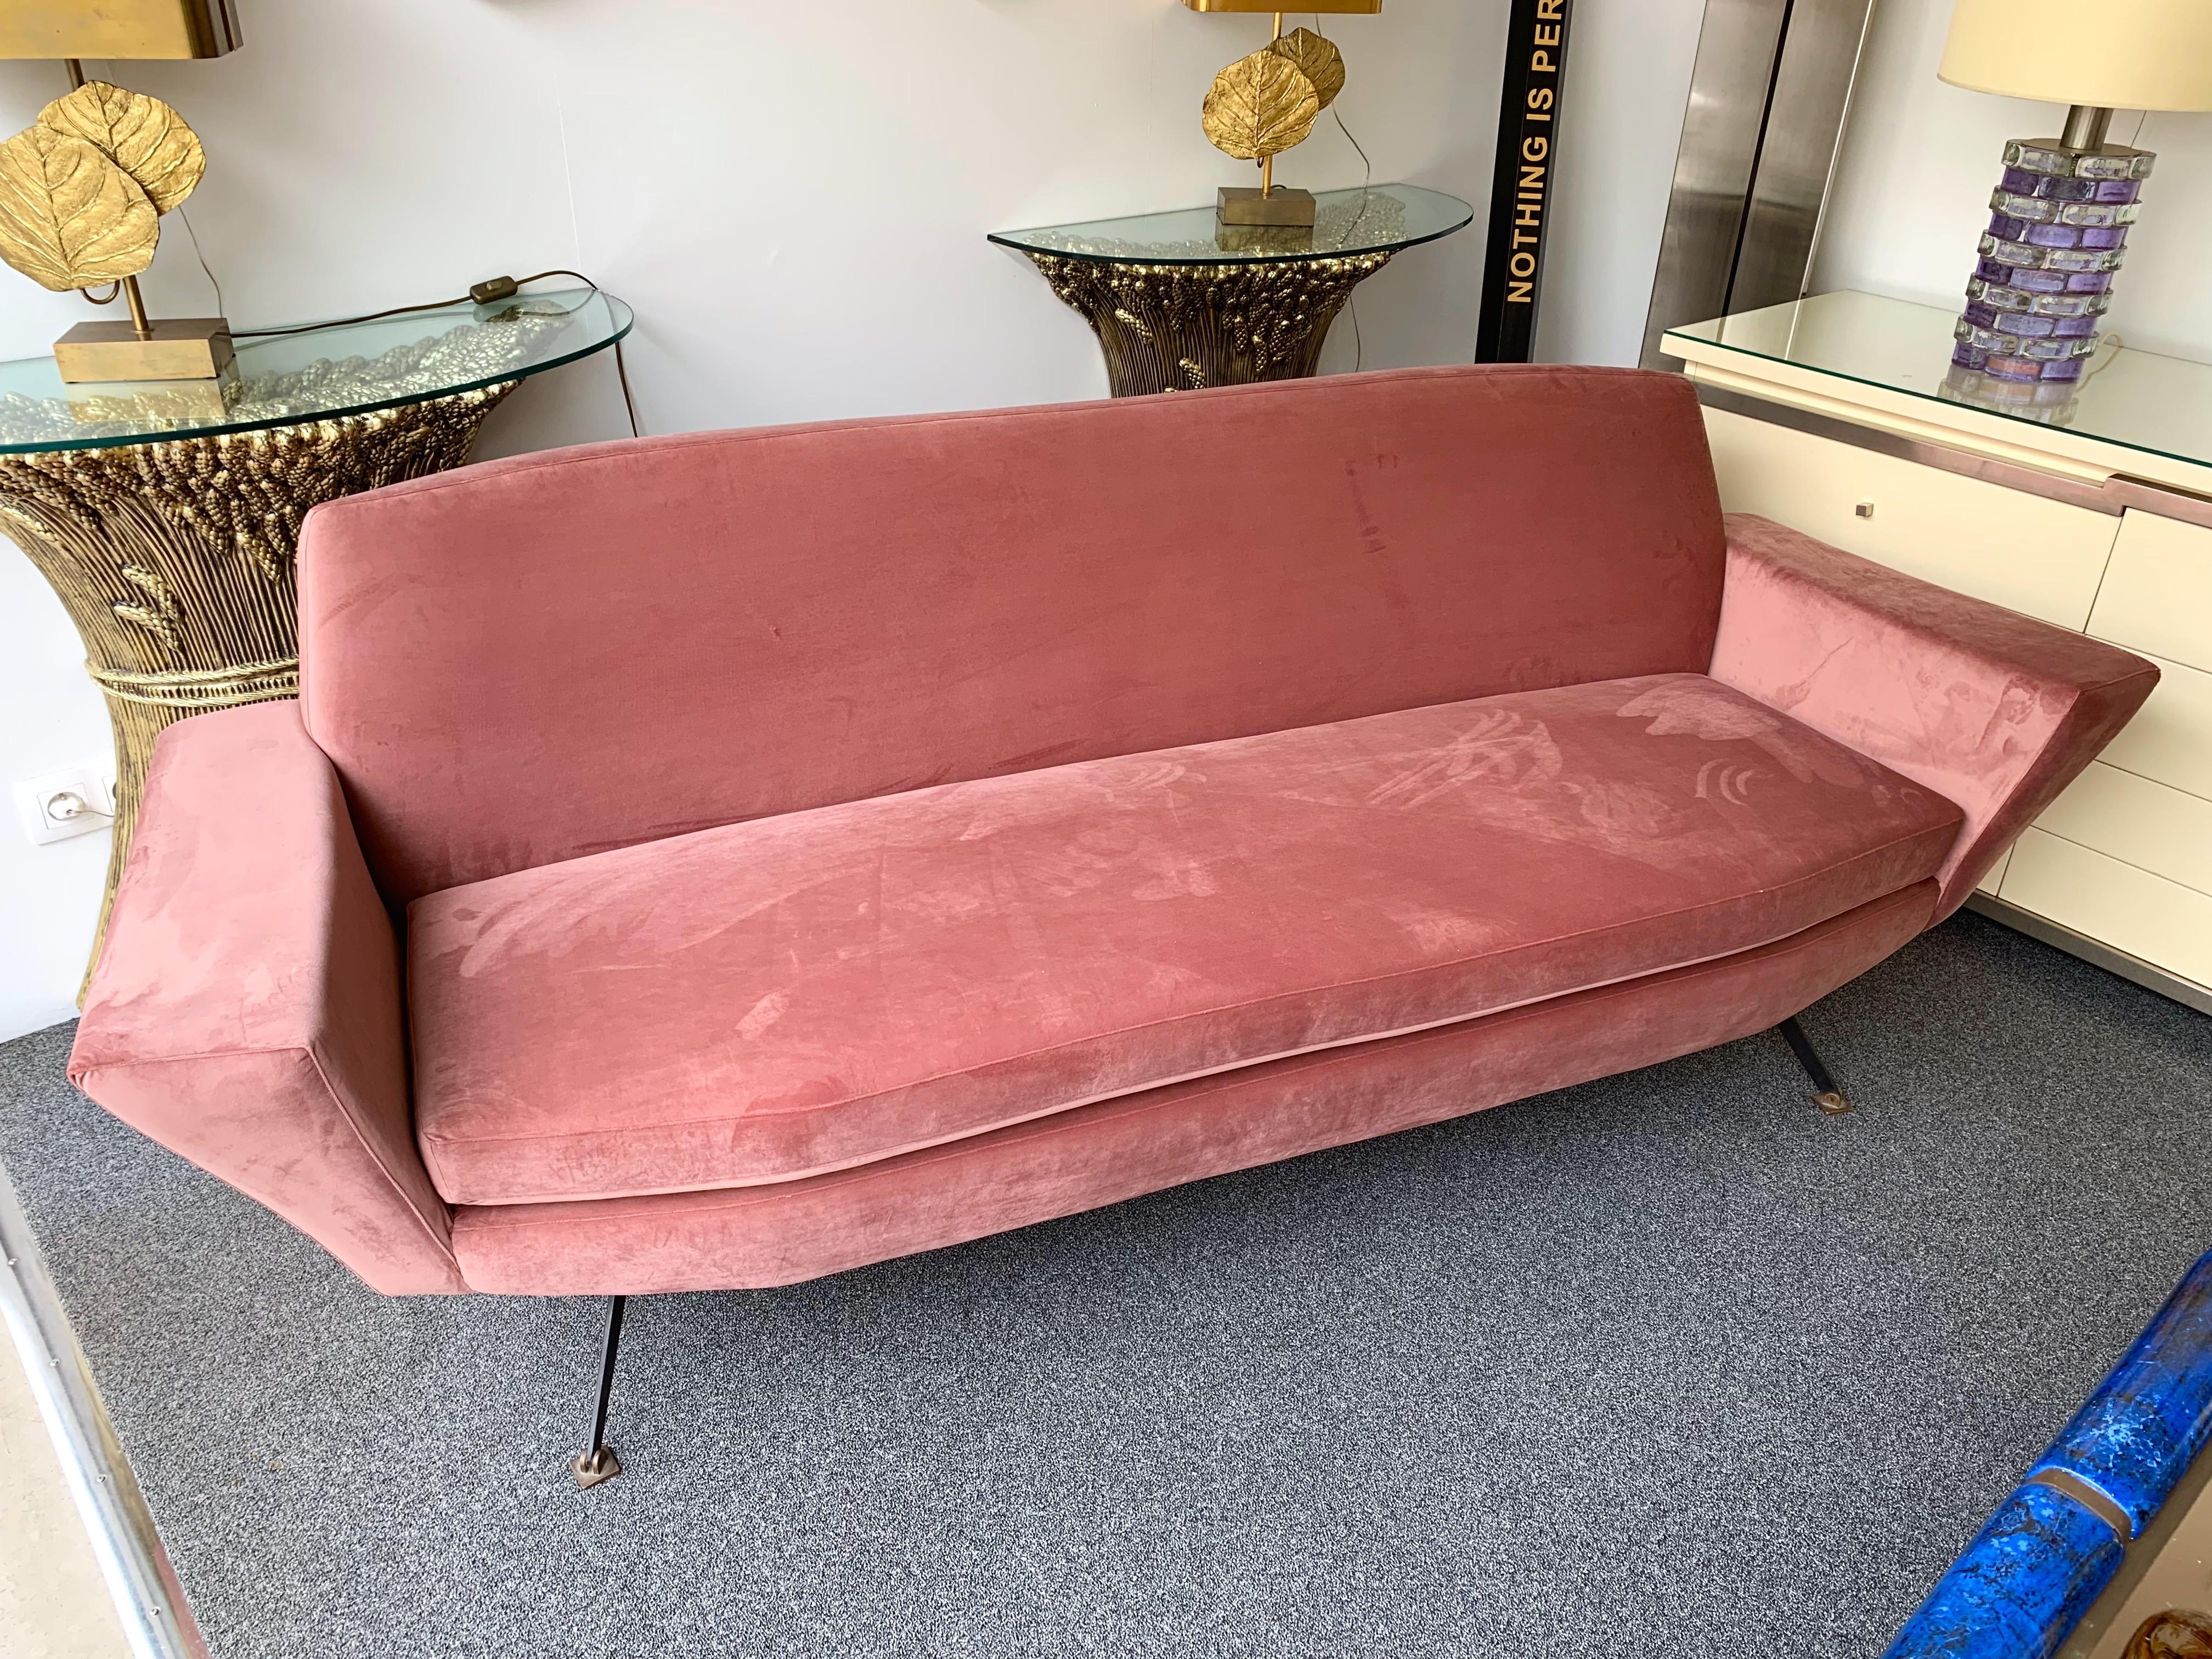 Rare living room set, pair of armchairs or lounge chairs and sofa model 538 by studio APA for the editor Lenzi. Black metal and brass particular feet. Fully upholstered in a nice old light pink style color velvet fabric. Original documentation